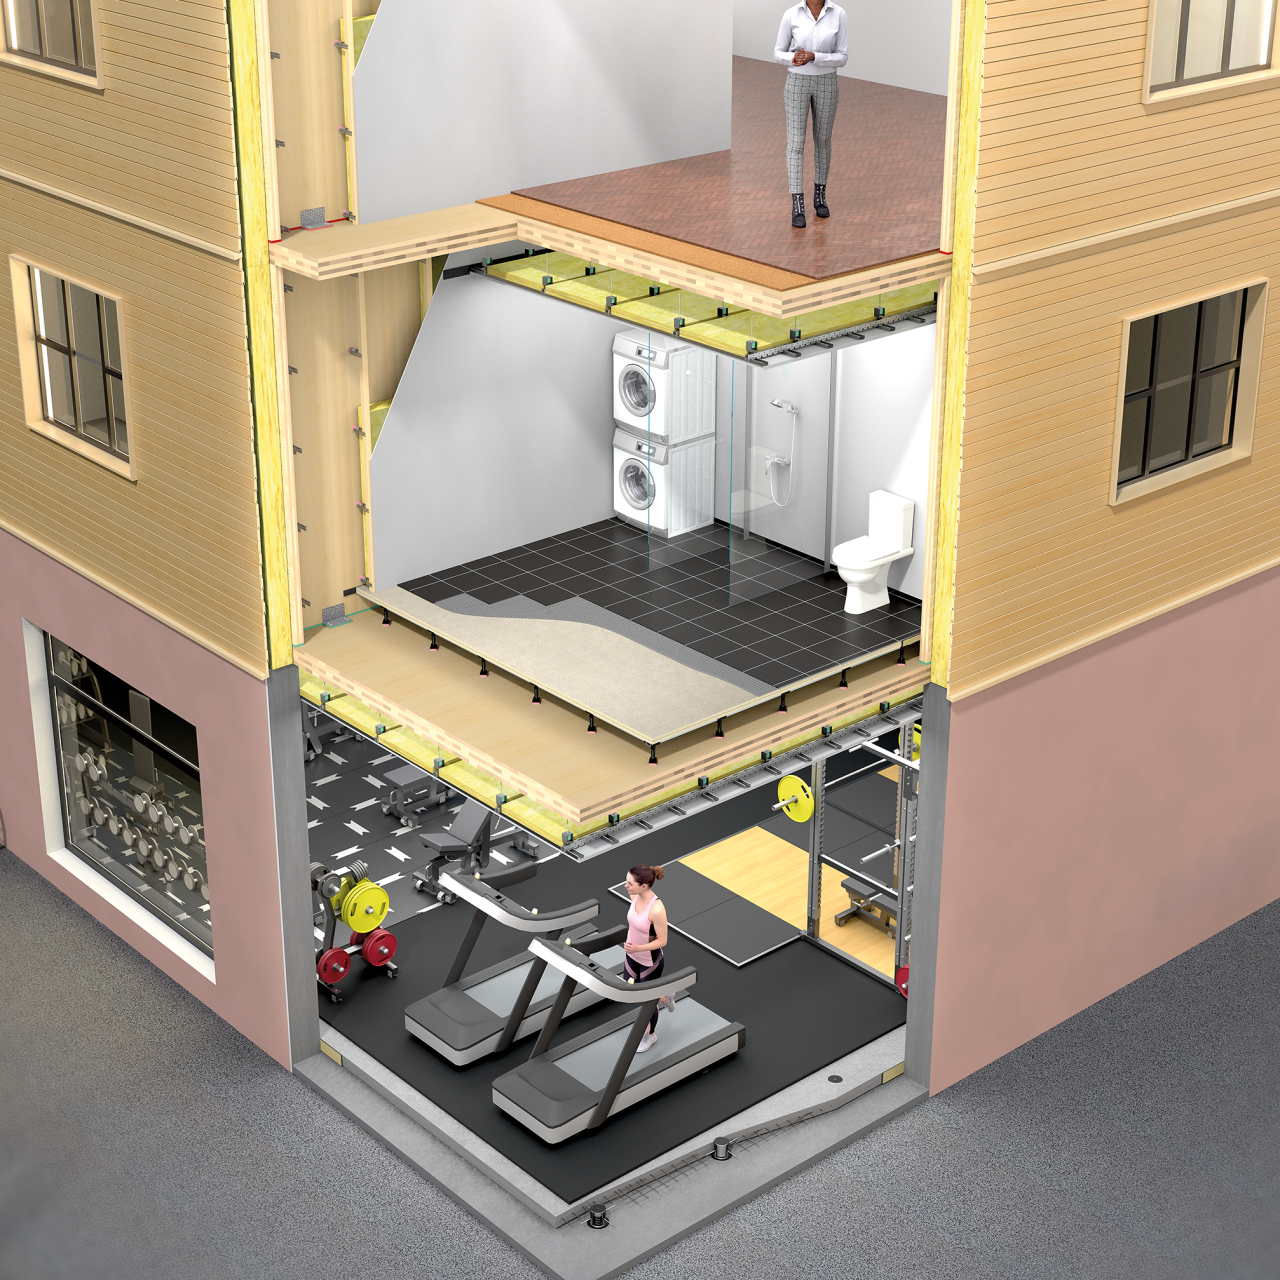 An illustration of a multi-story building with products from Vibratec to reduce vibrations and noise